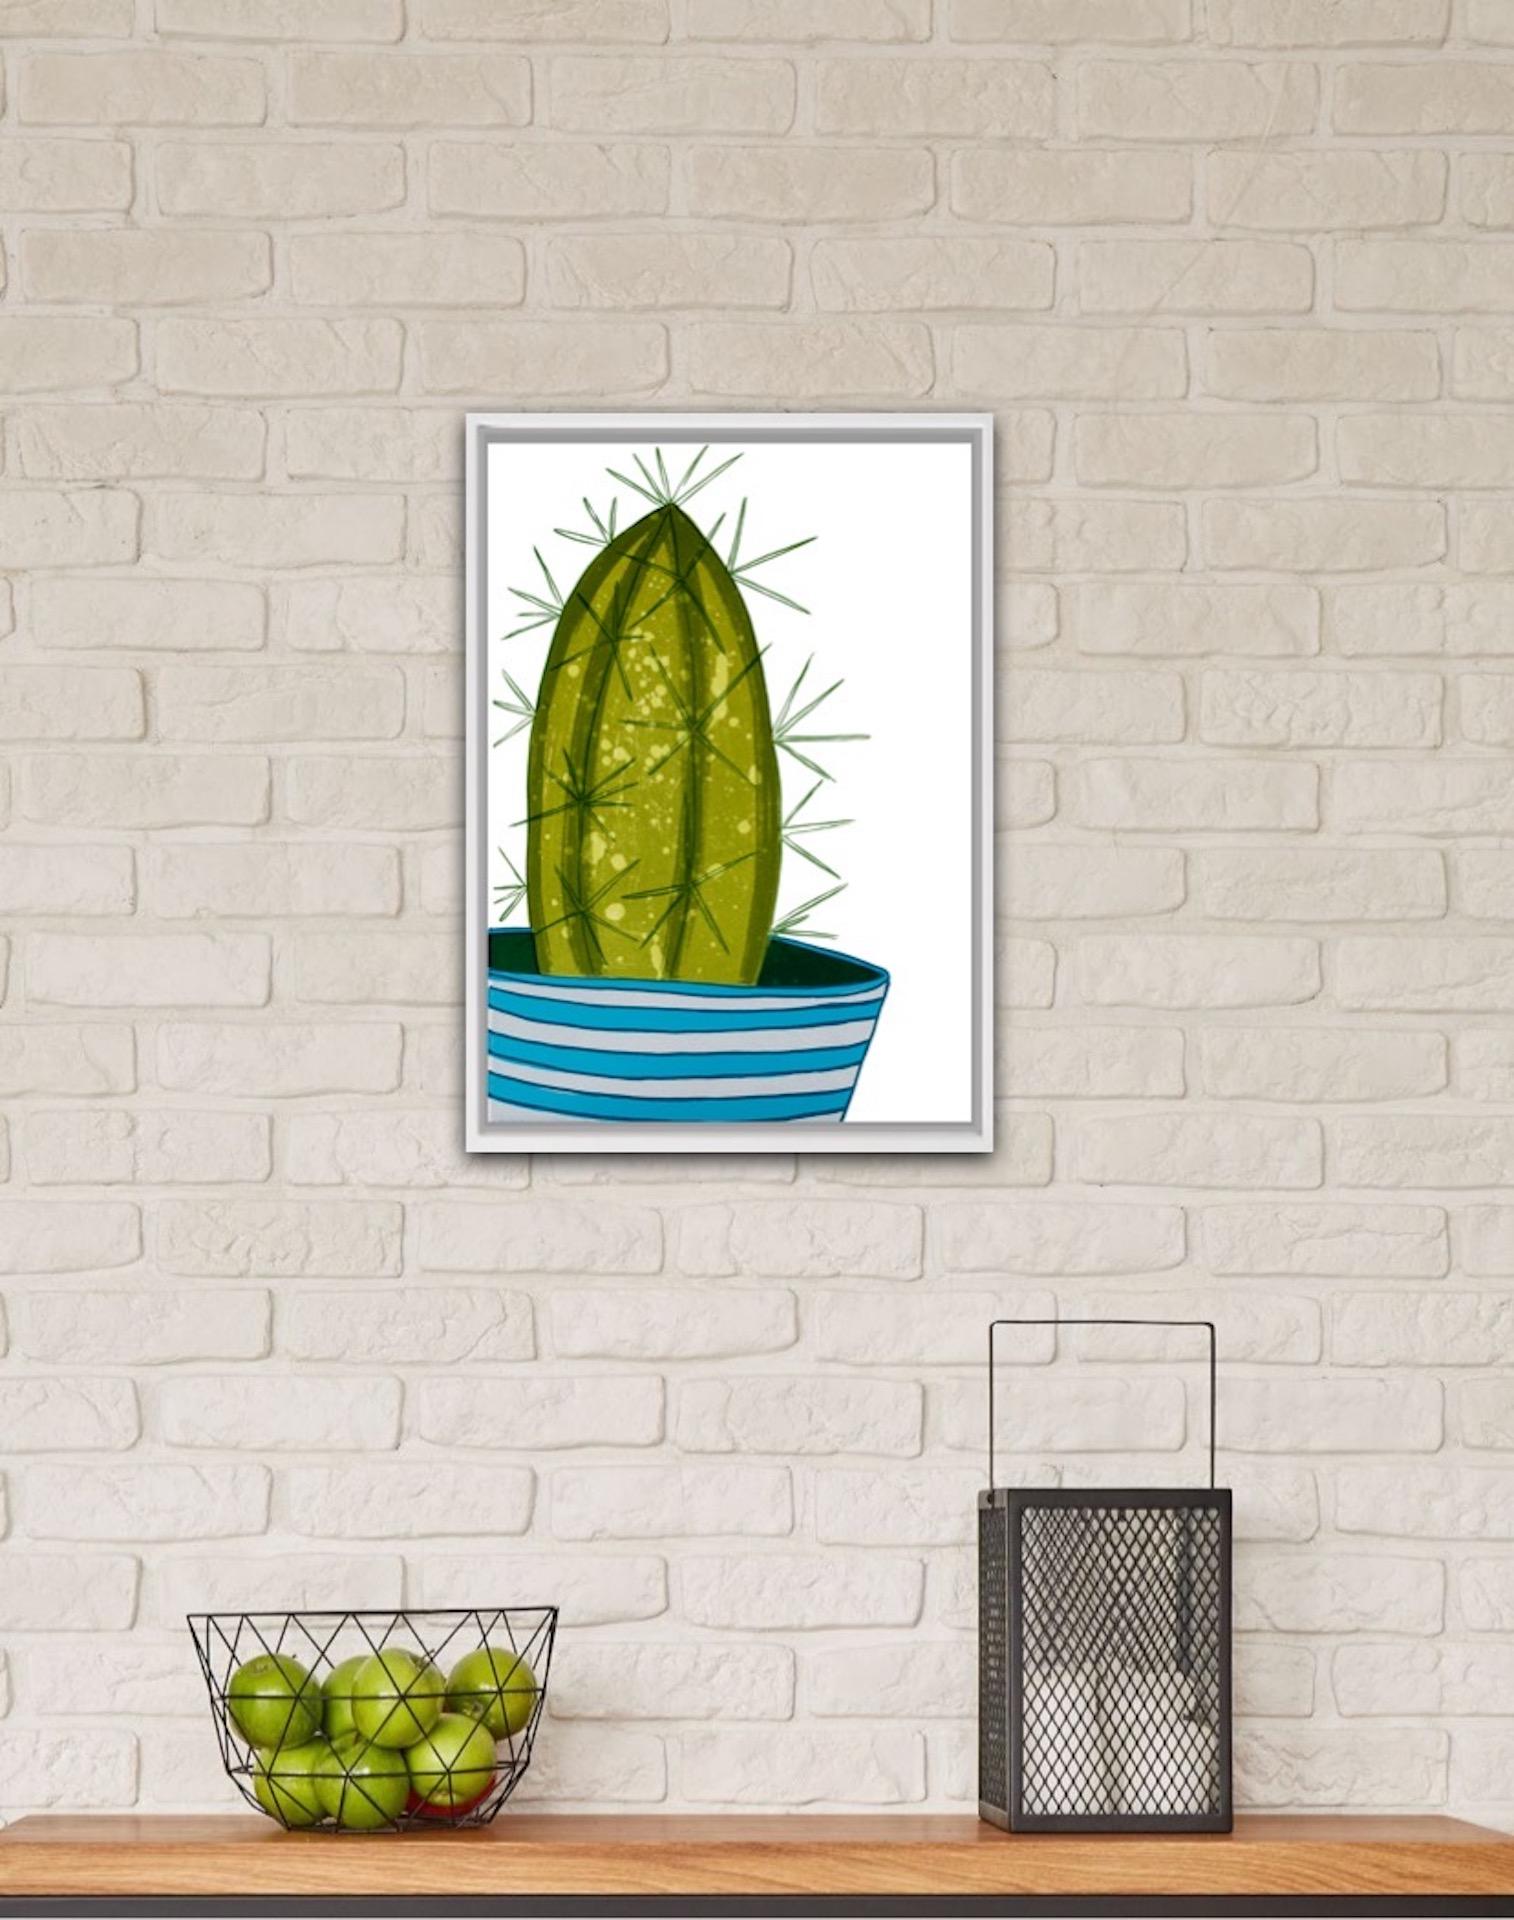 Kerry Day
Cactus II
Limited Edition Screen Print
Edition of 20
Sheet Size: H 42cm x W 29cm x D 0.1cm
Sold Unframed
Please note that insitu images are purely an indication of how a piece may look.

Cactus II is beautiful Spiky Still life of a one of